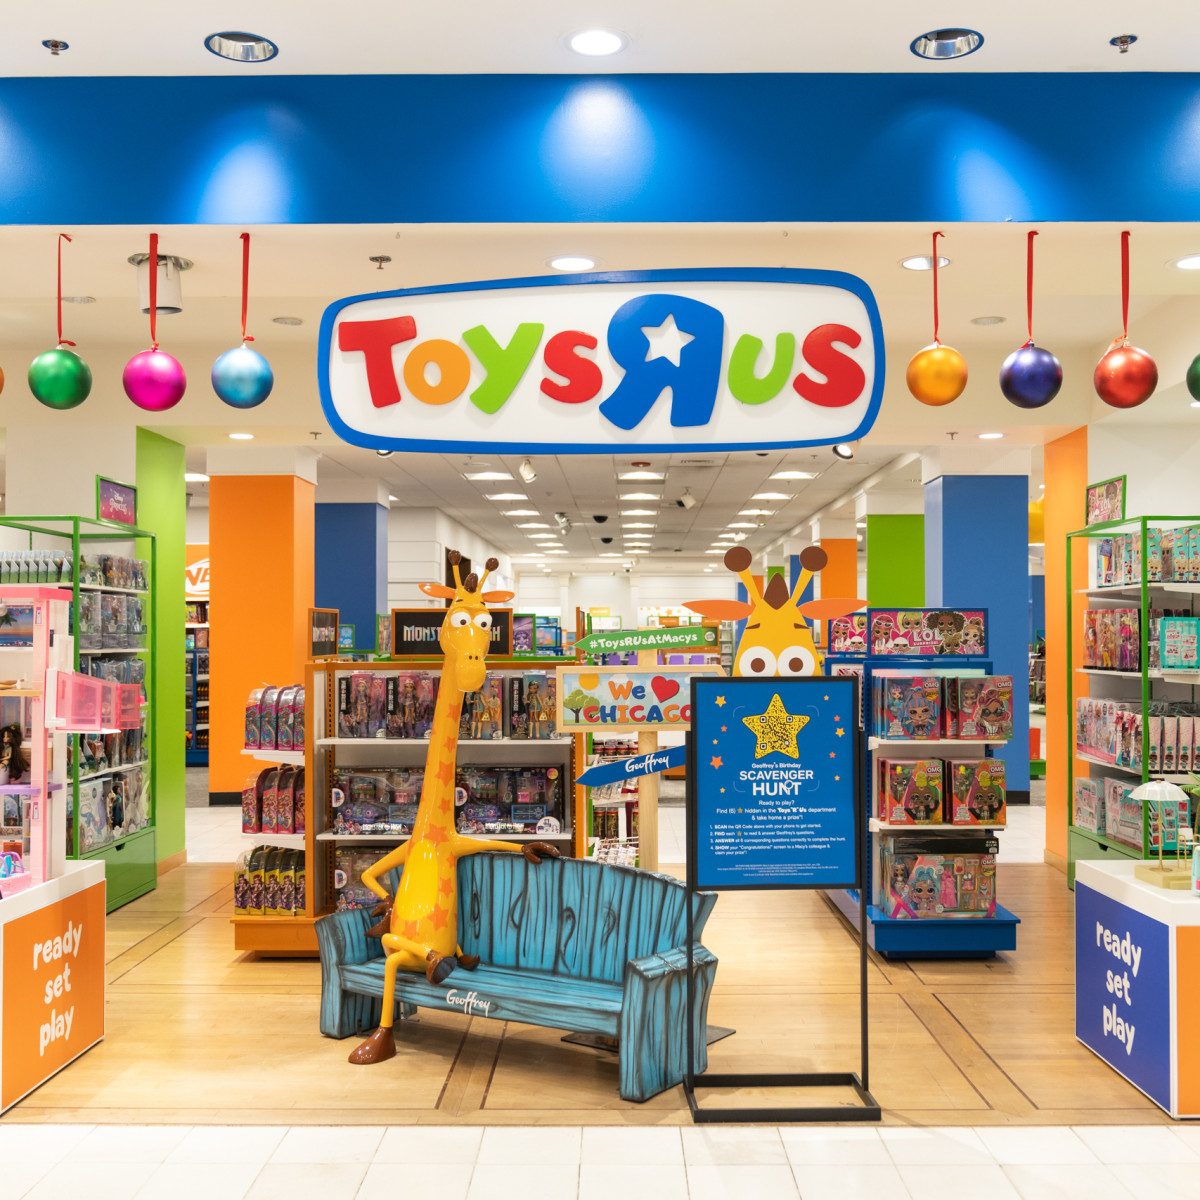 Inside The New Toys R Us Store, Which Combines Tech With Old-Fashioned Play